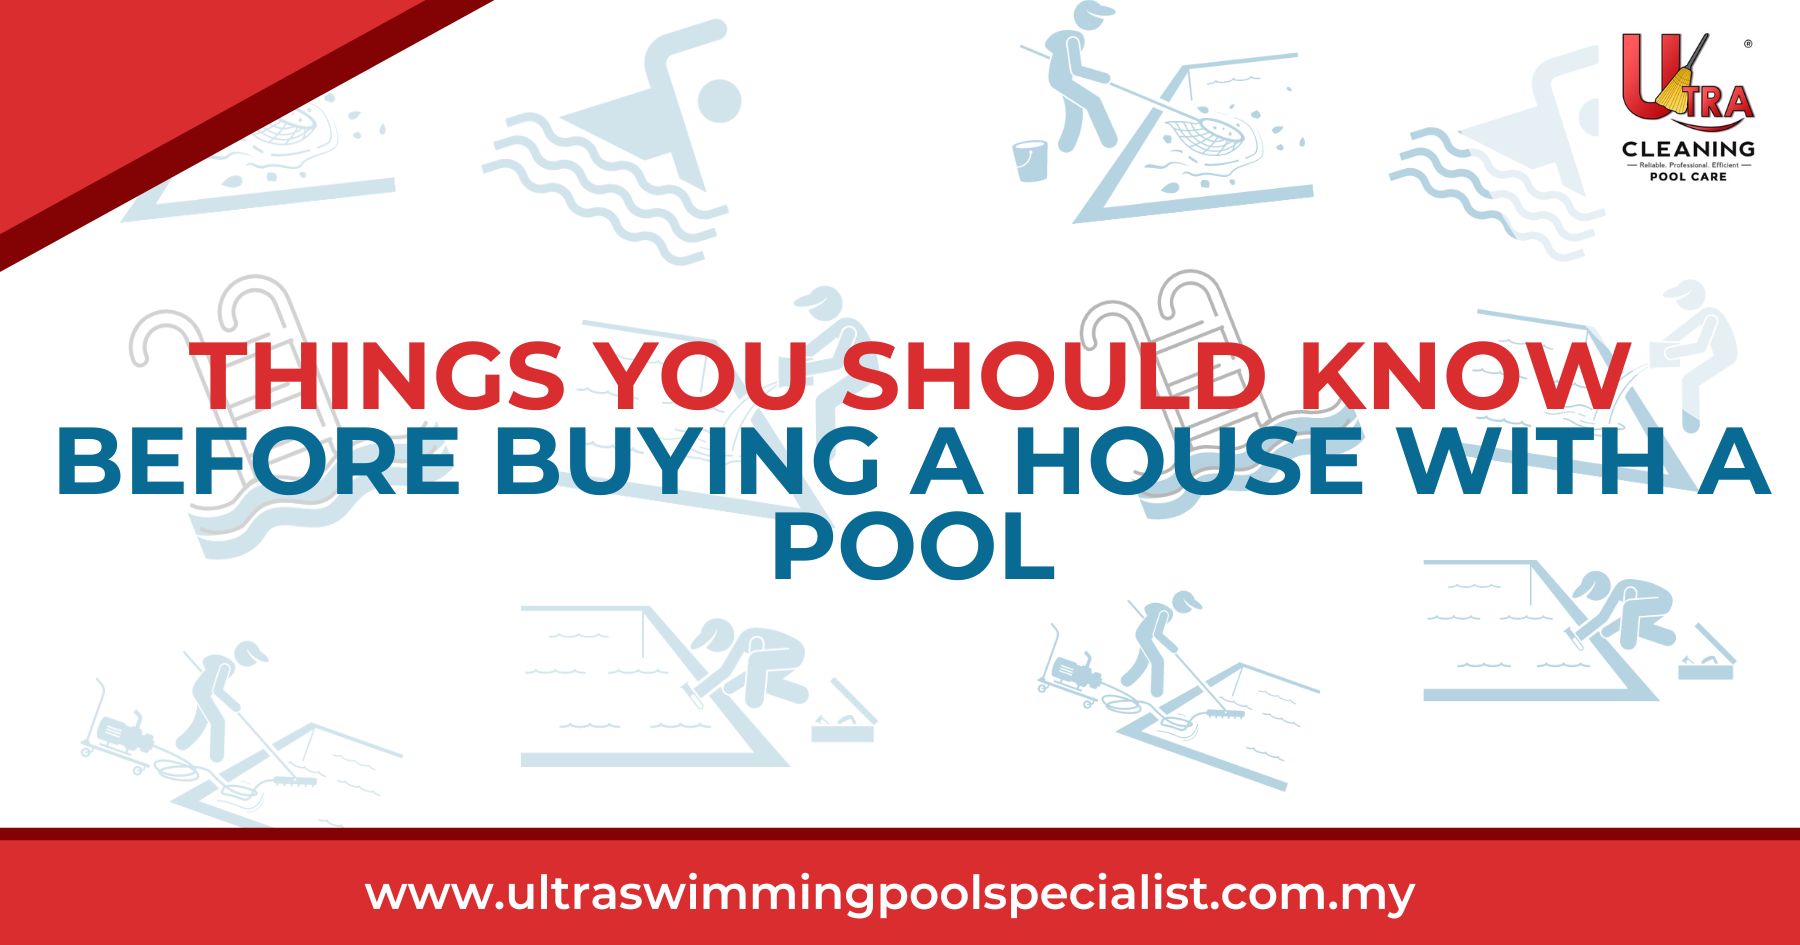 Things You Should Know Before Buying a House With a Pool